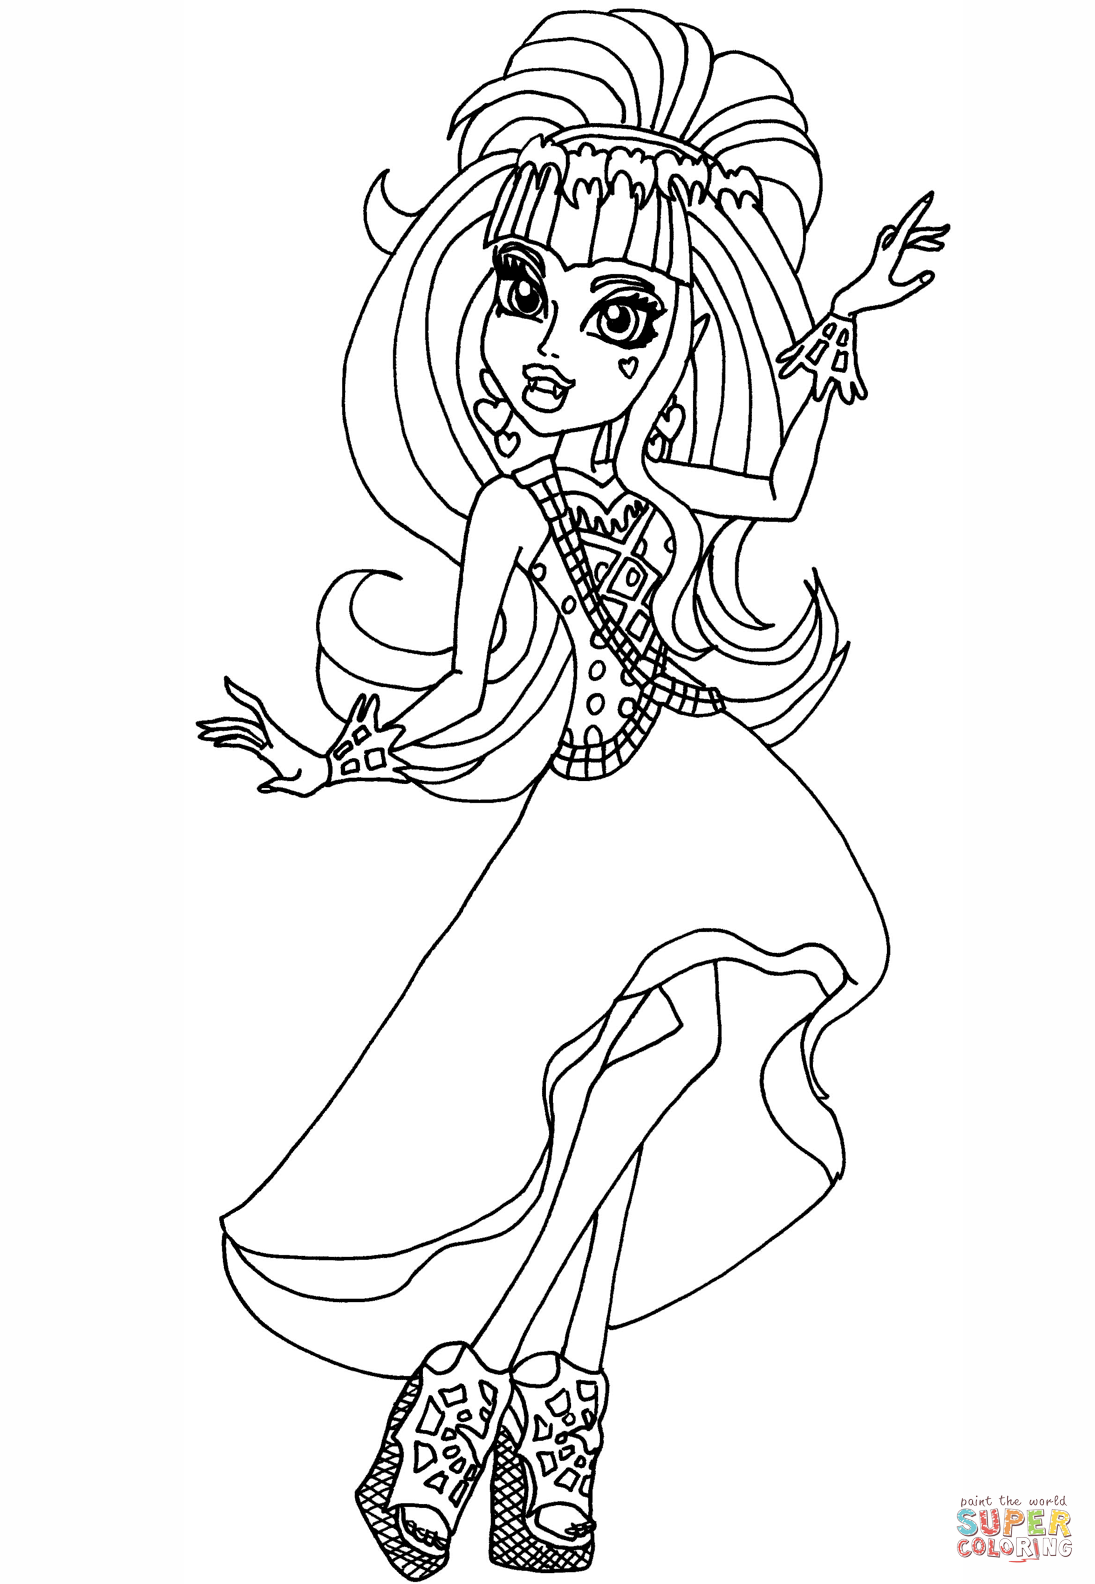 Draculaura wishes coloring page free printable coloring pages